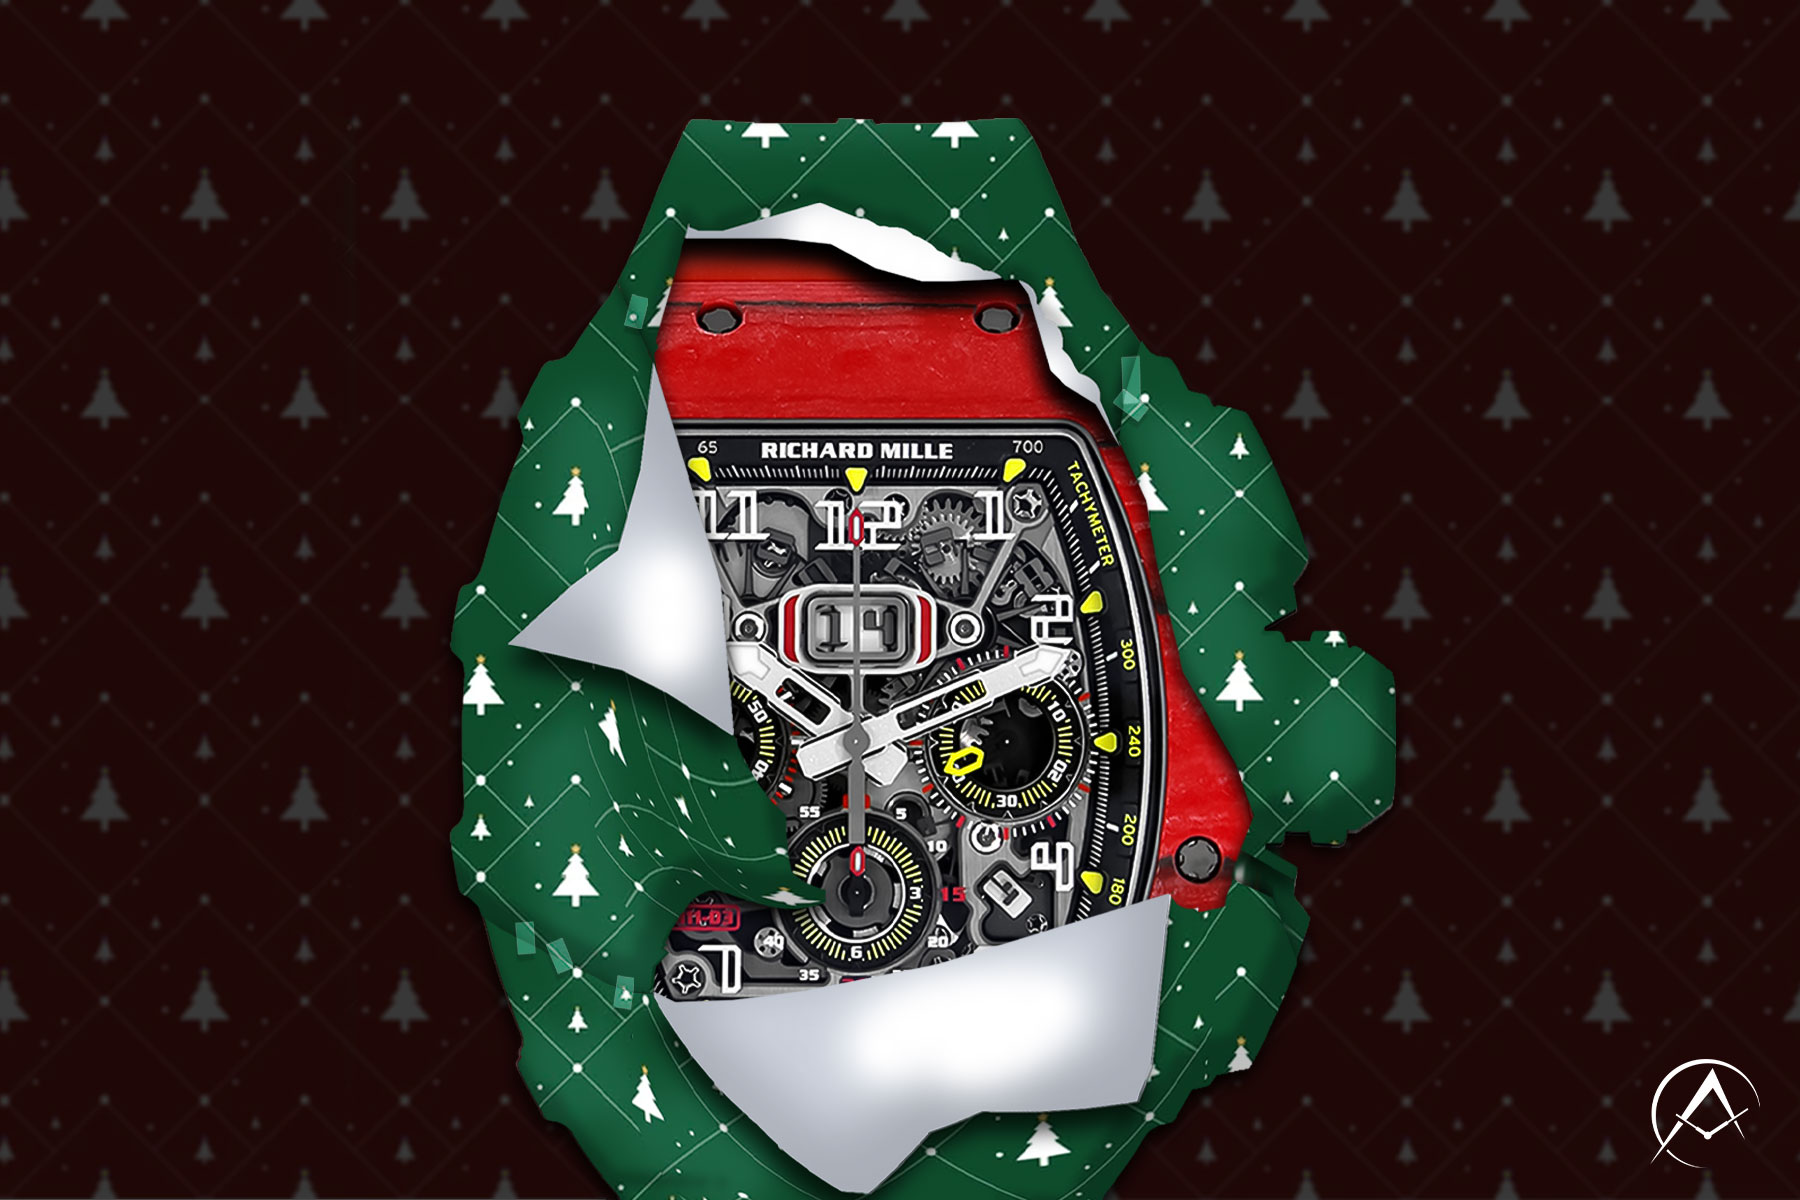 Red Richard Mille RM11-03 Half Unwrapped from Christmas Wrapping Paper